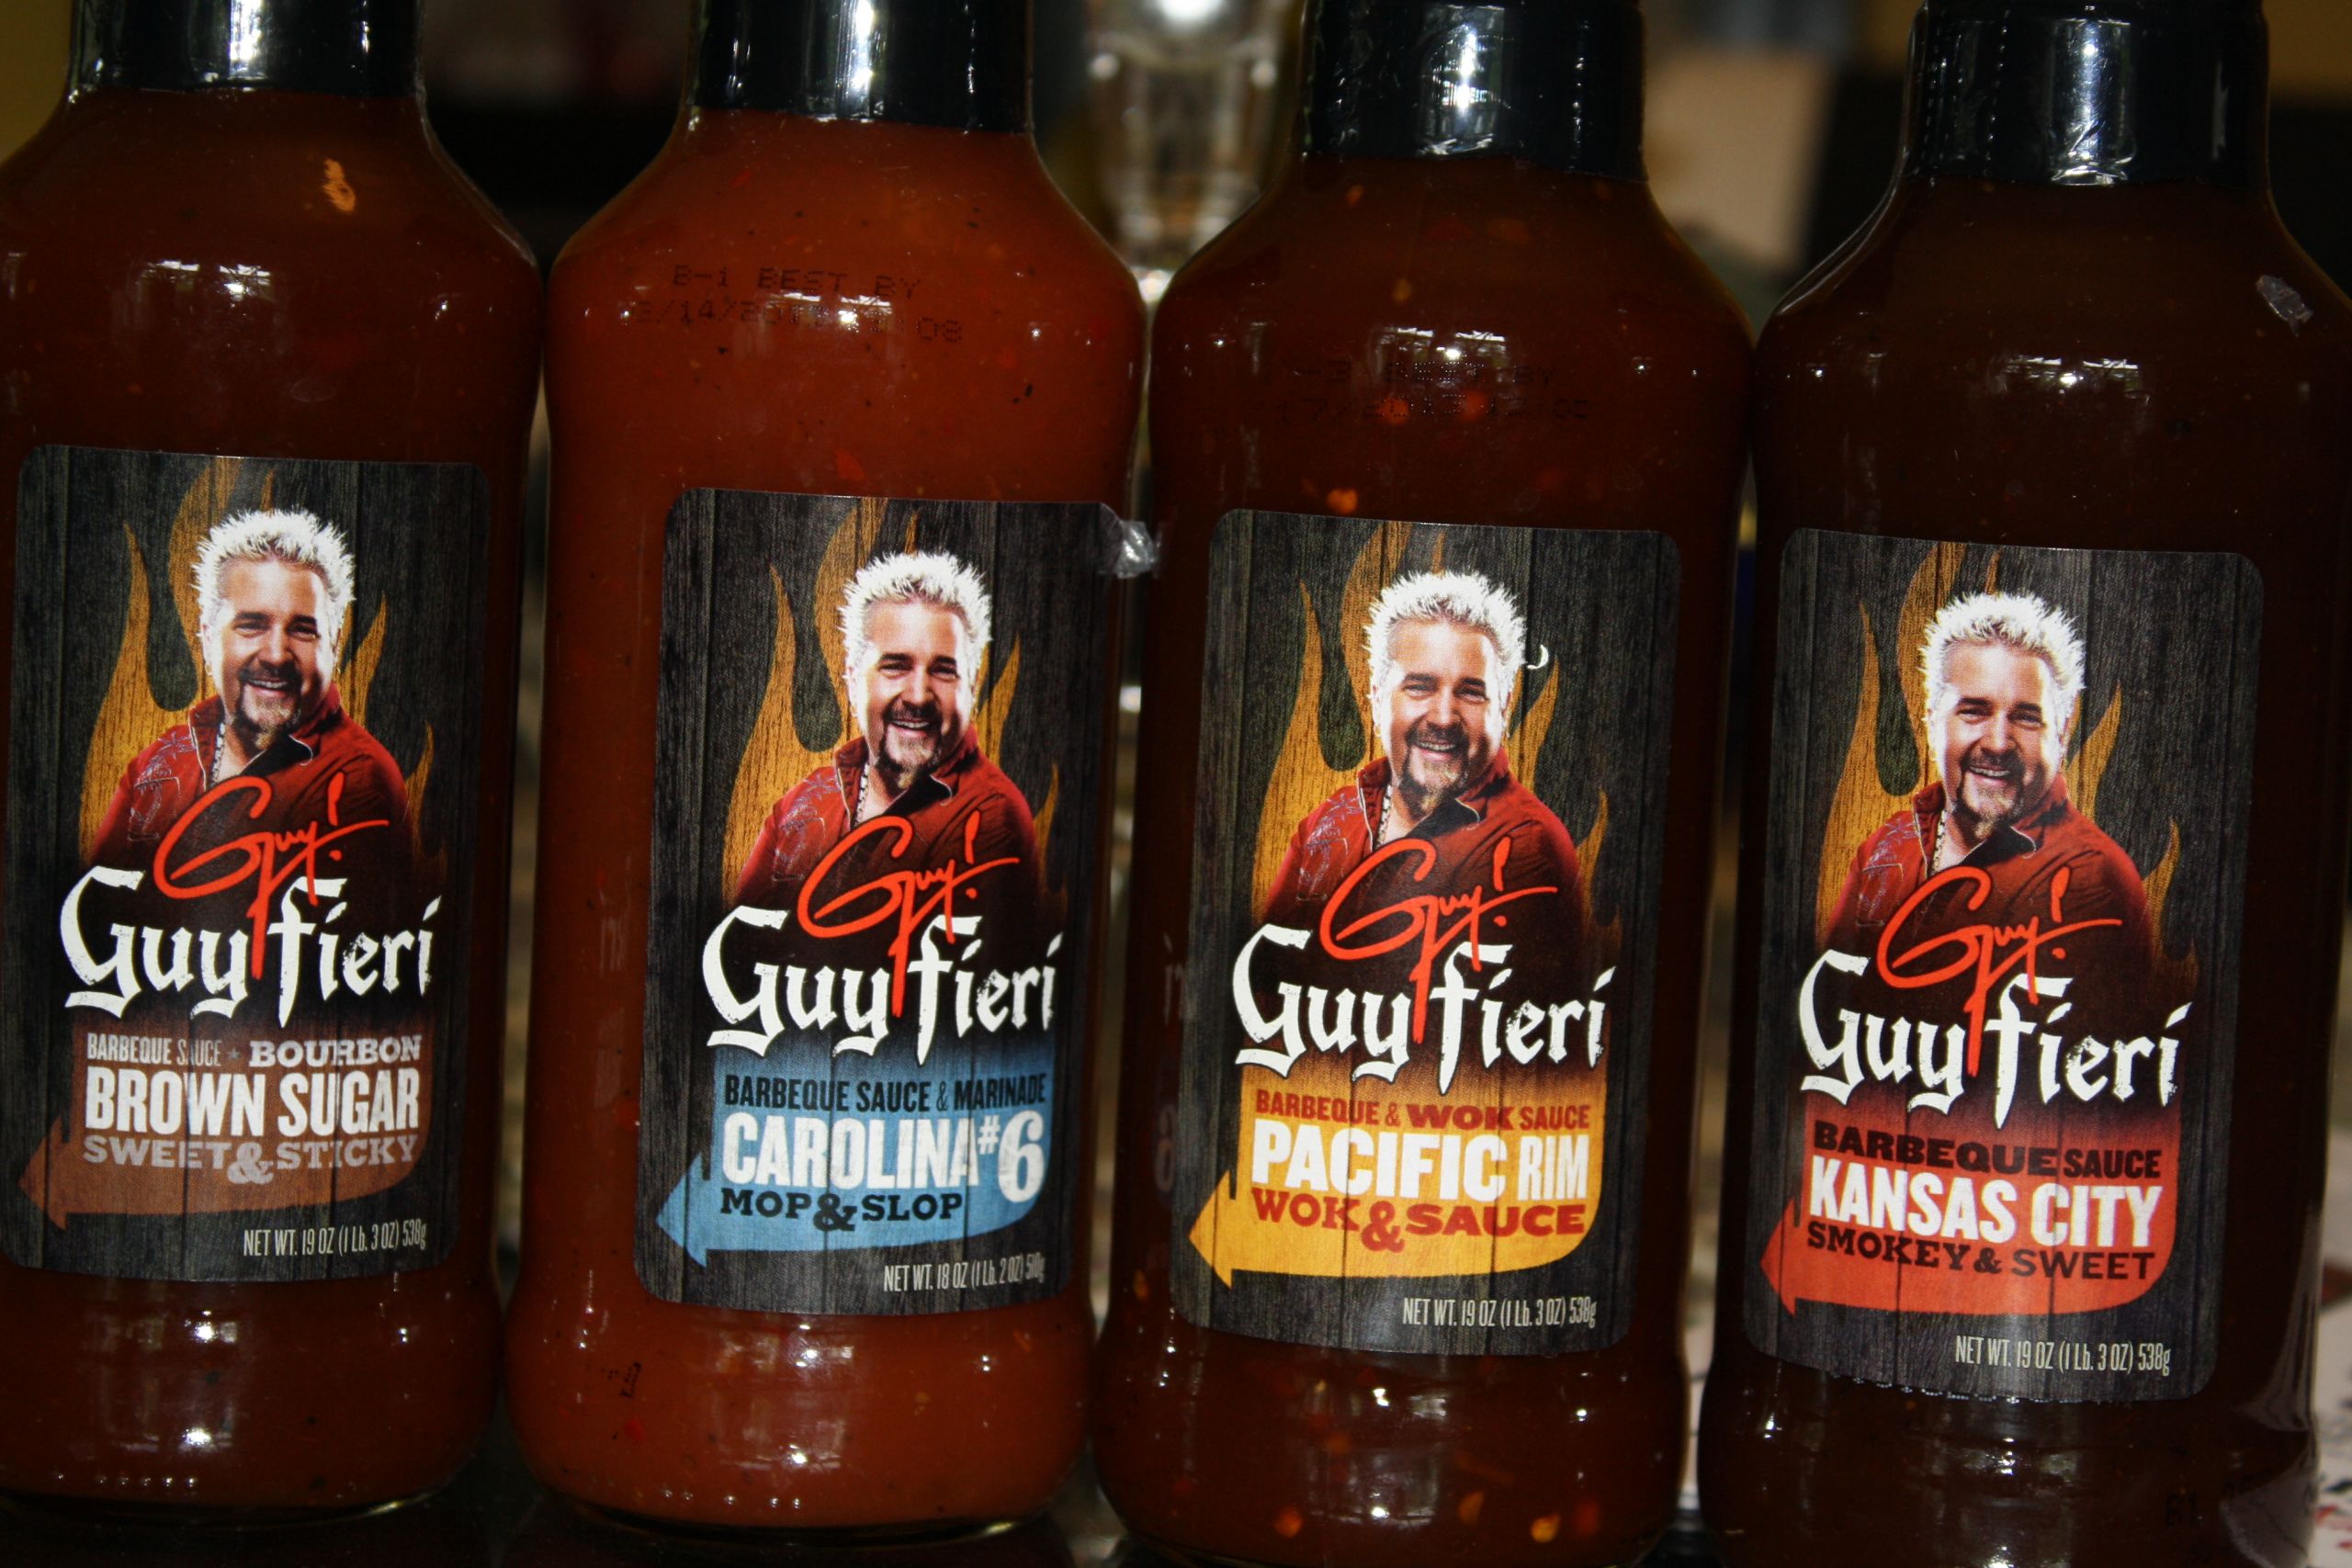 Guy Fieri Bbq Sauce
 Guy Fieri’s New Sauces a Baked Chicken Fingers Recipe to